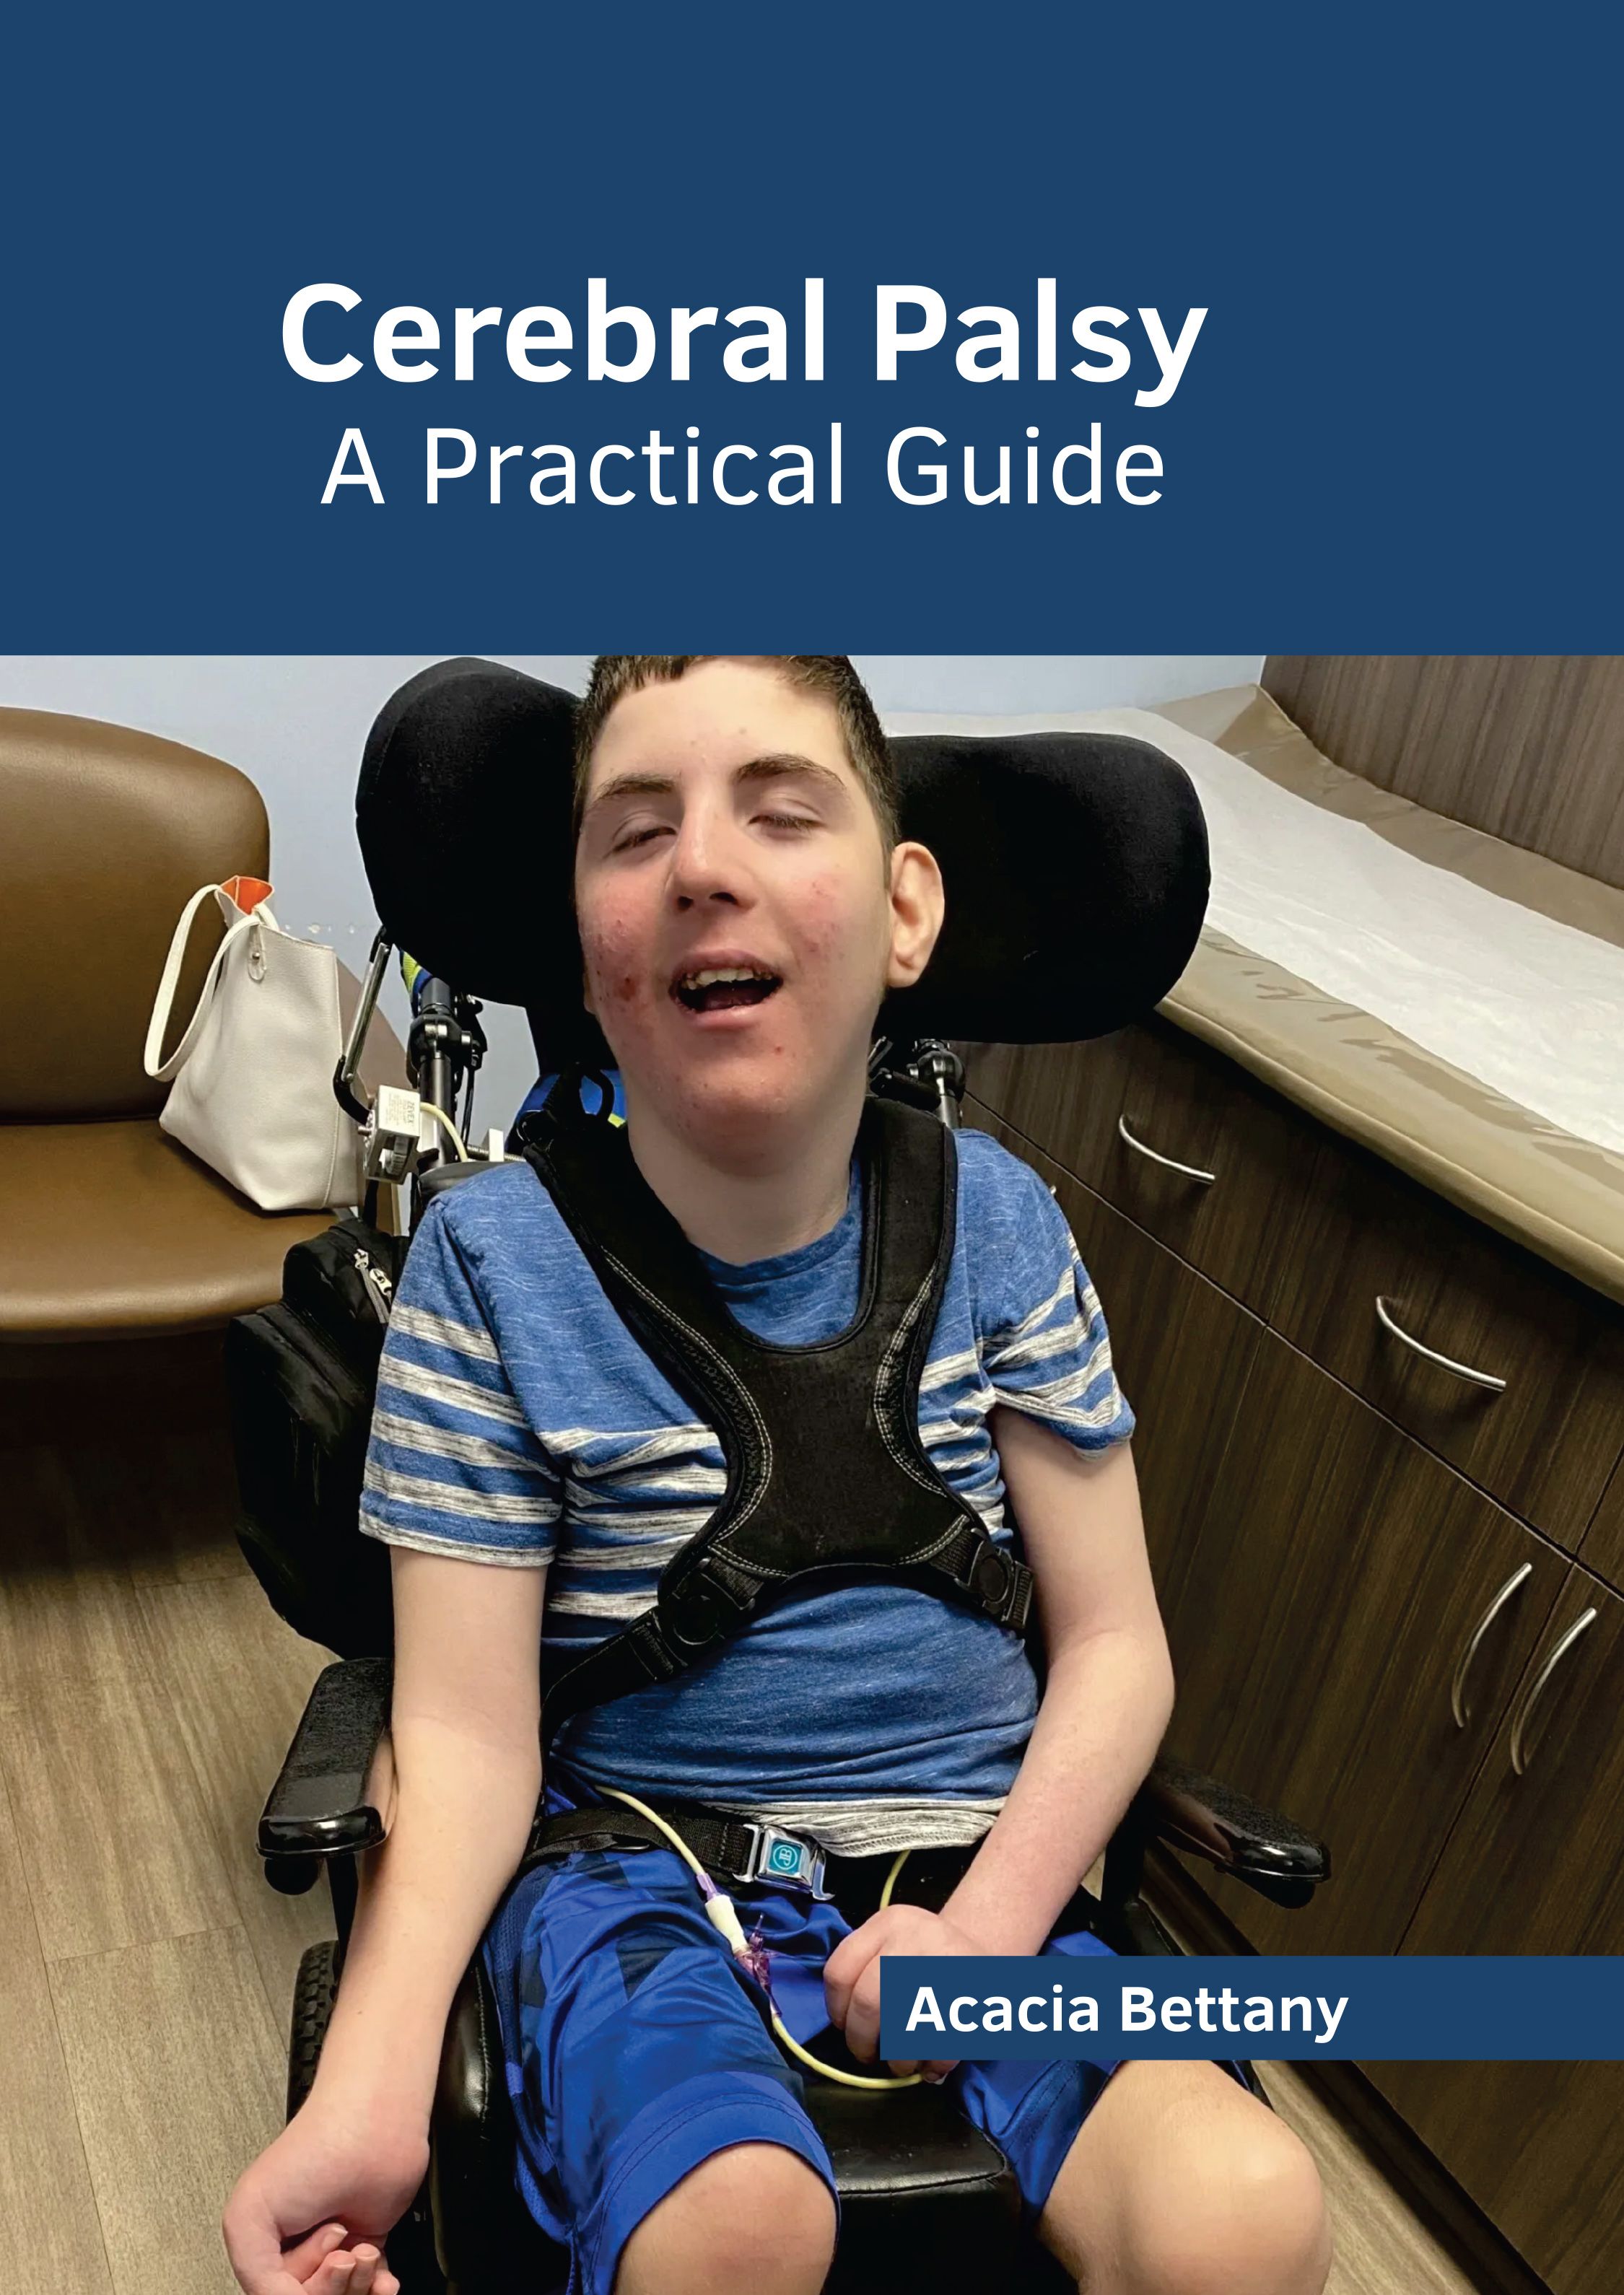 

exclusive-publishers/american-medical-publishers/cerebral-palsy-a-practical-guide-9781639279739